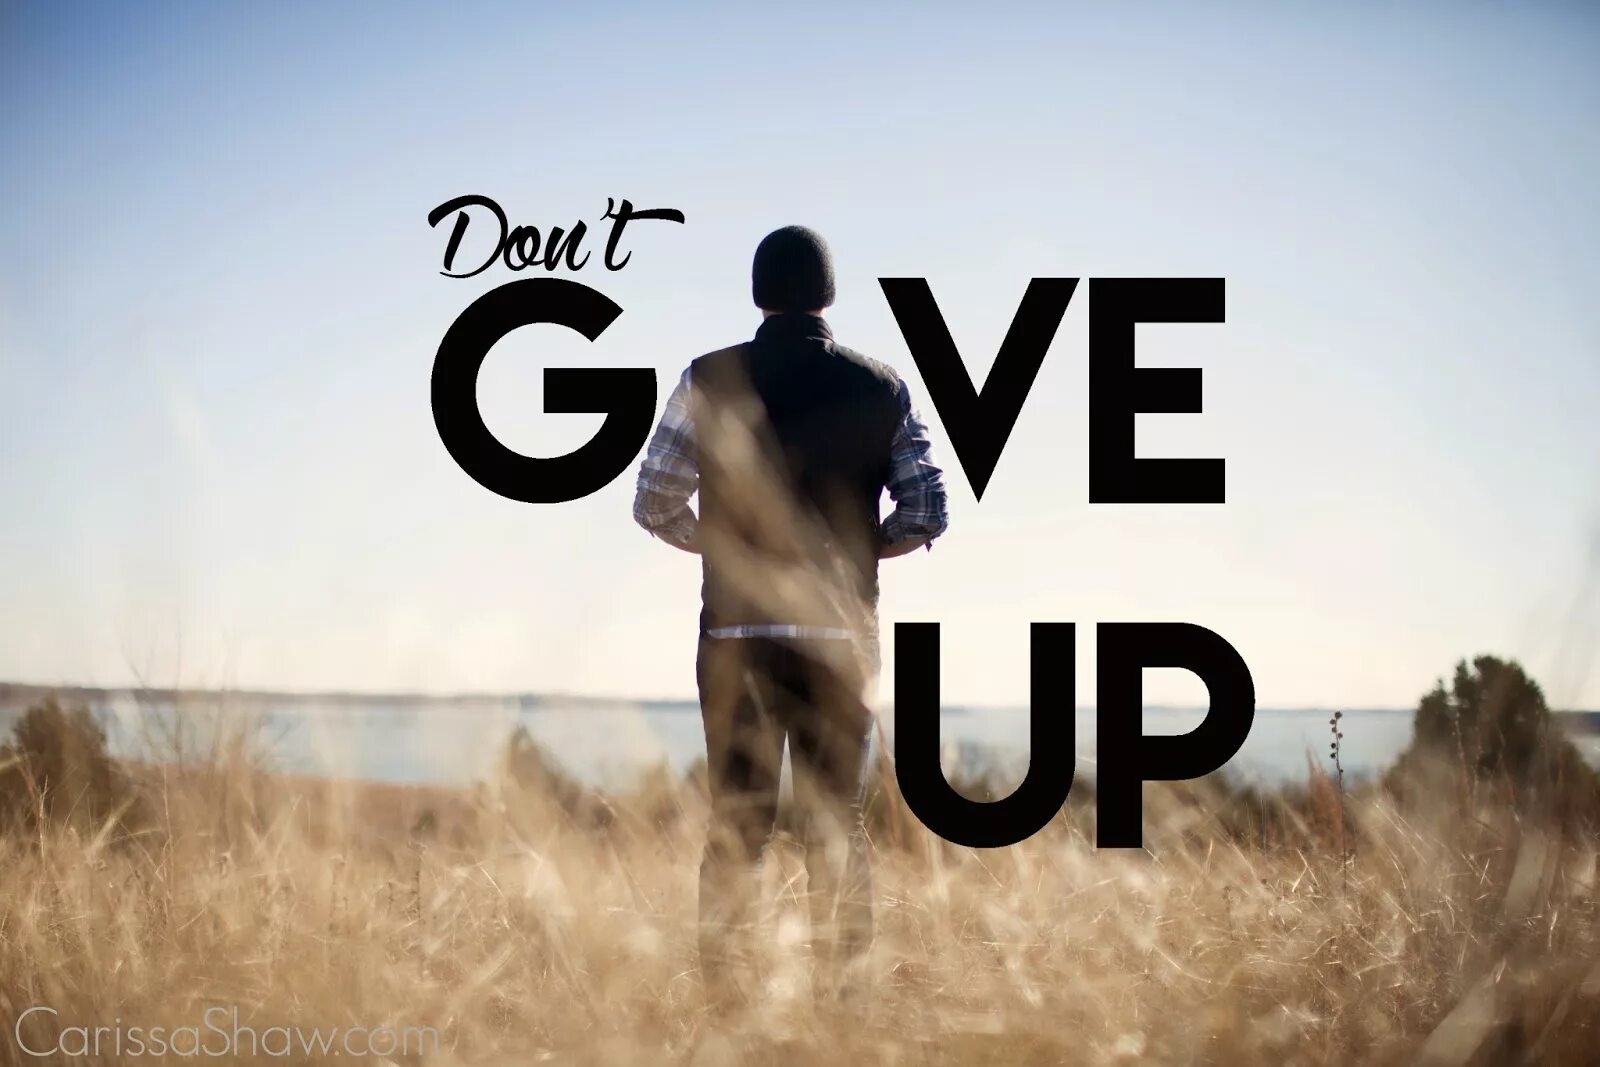 Don`t give up. Don't give up картинка. Надпись don't give up. Never give up картинки. Do it on your own